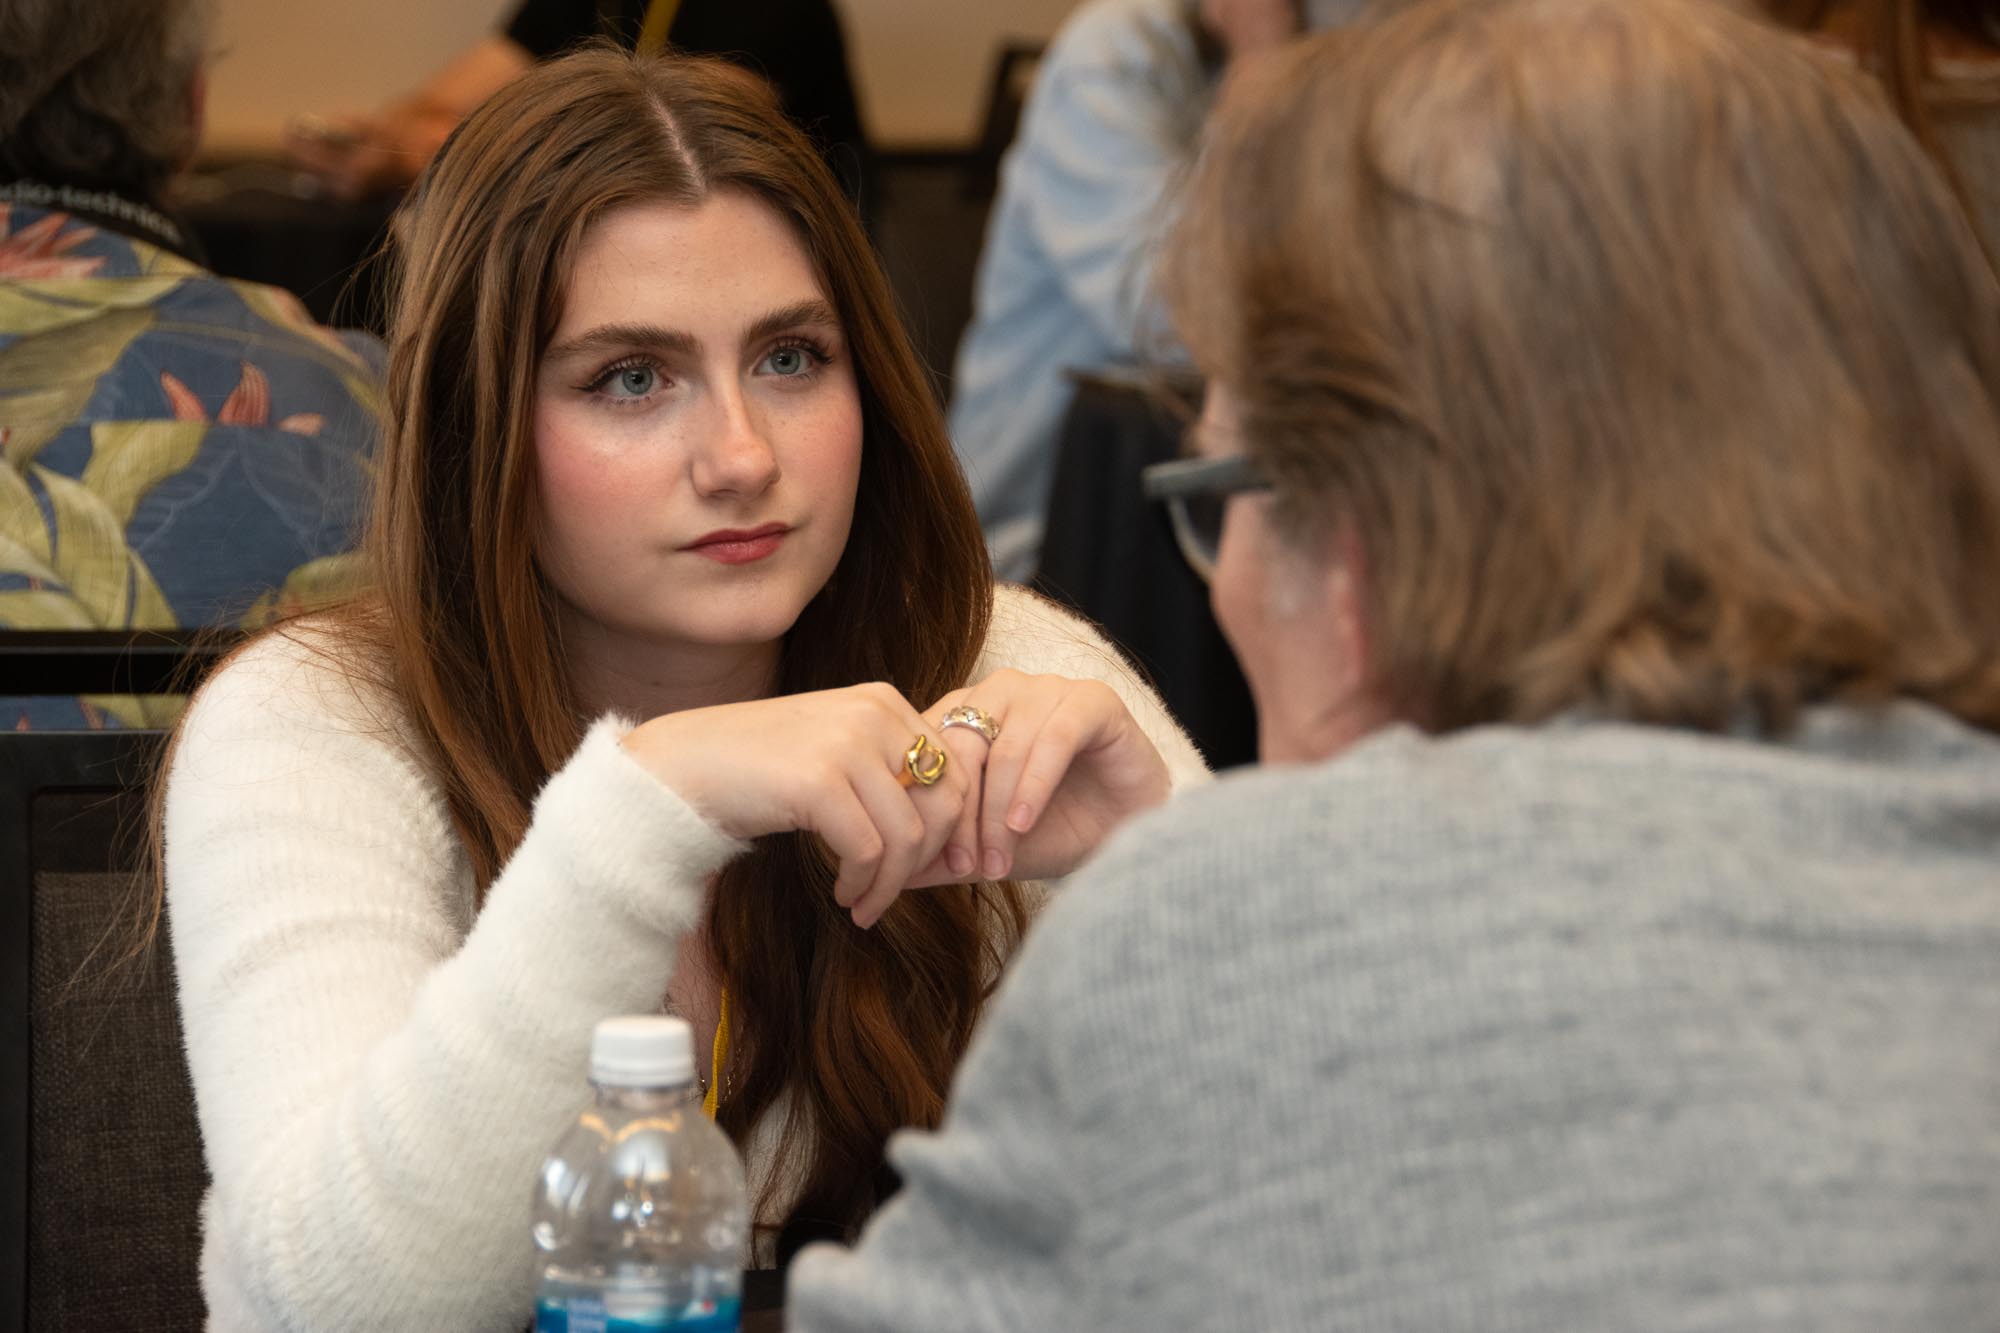 We couldn’t figure out who this TAXI member is, but she is clearly listening carefully to every word her mentor, Dean Krippaehne, is saying during their One-to-One Mentor session.